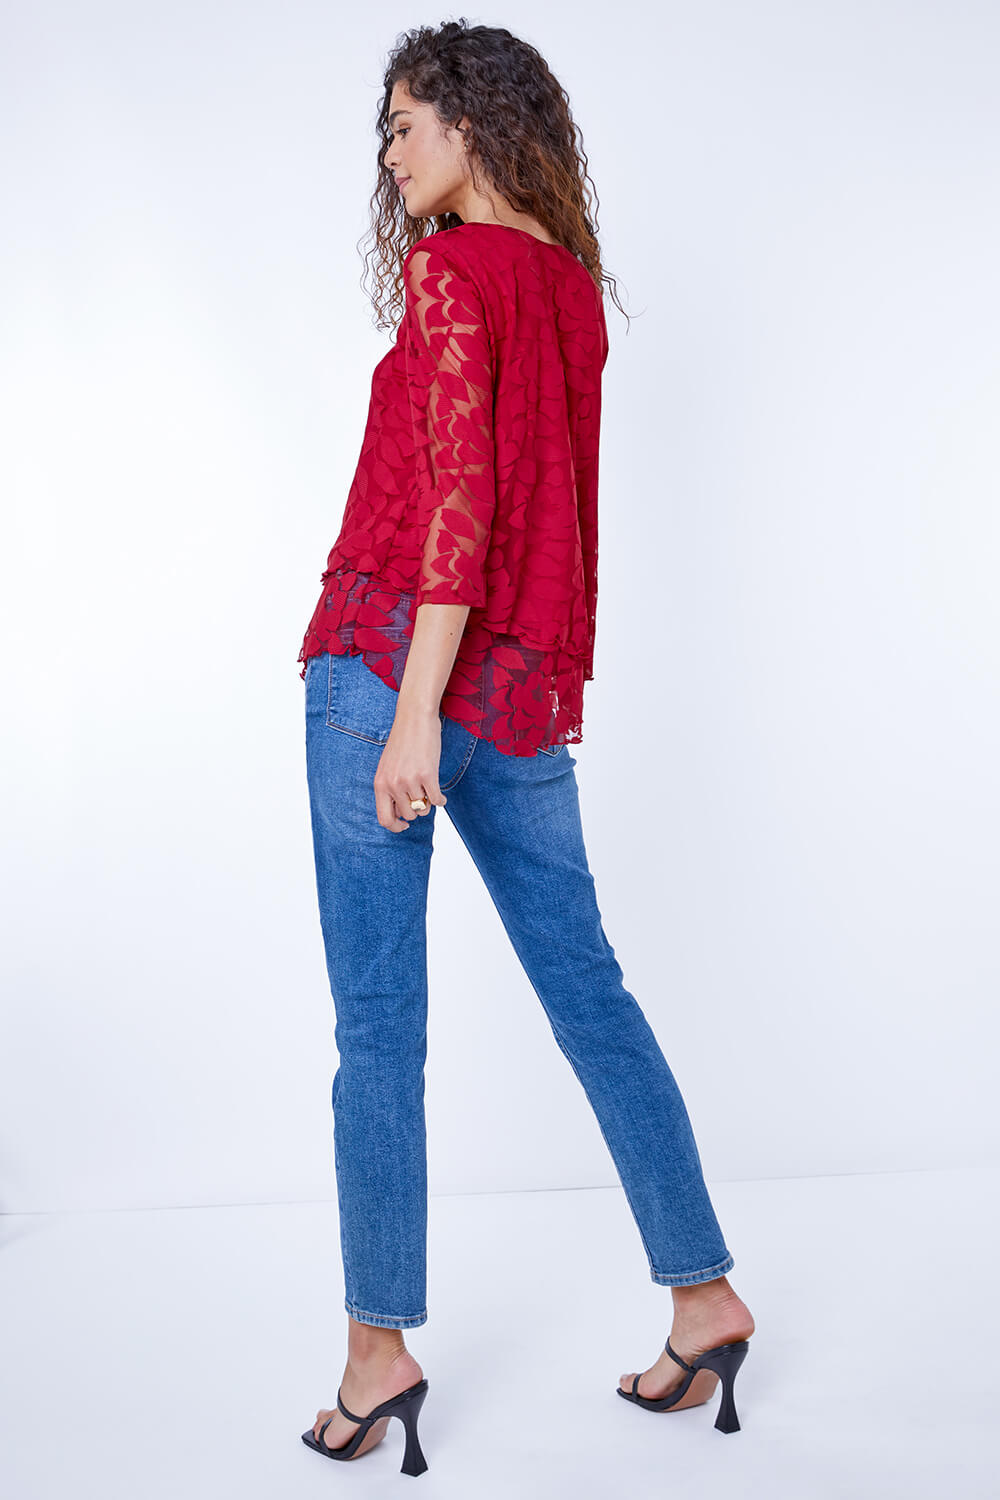 Red Burnout Leaf Asymmetric Stretch Top, Image 2 of 5